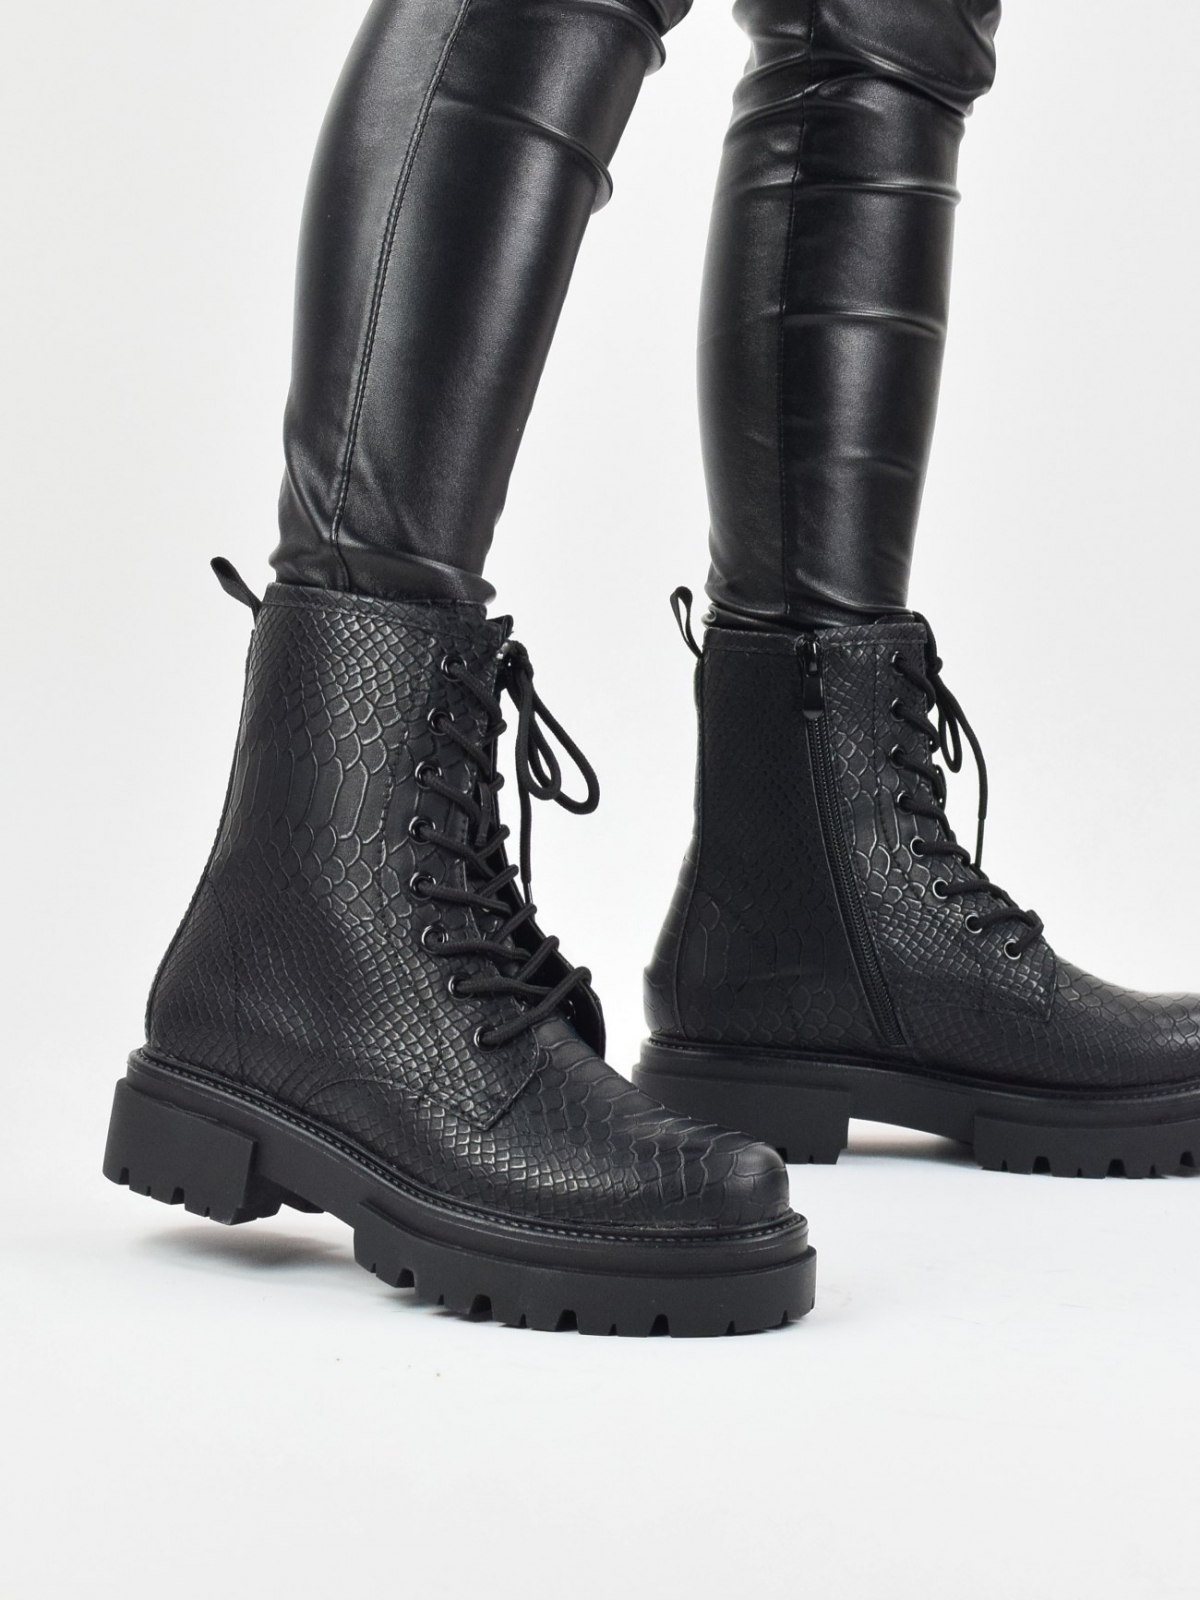 Snake style lace up ankle boots with side zip in black